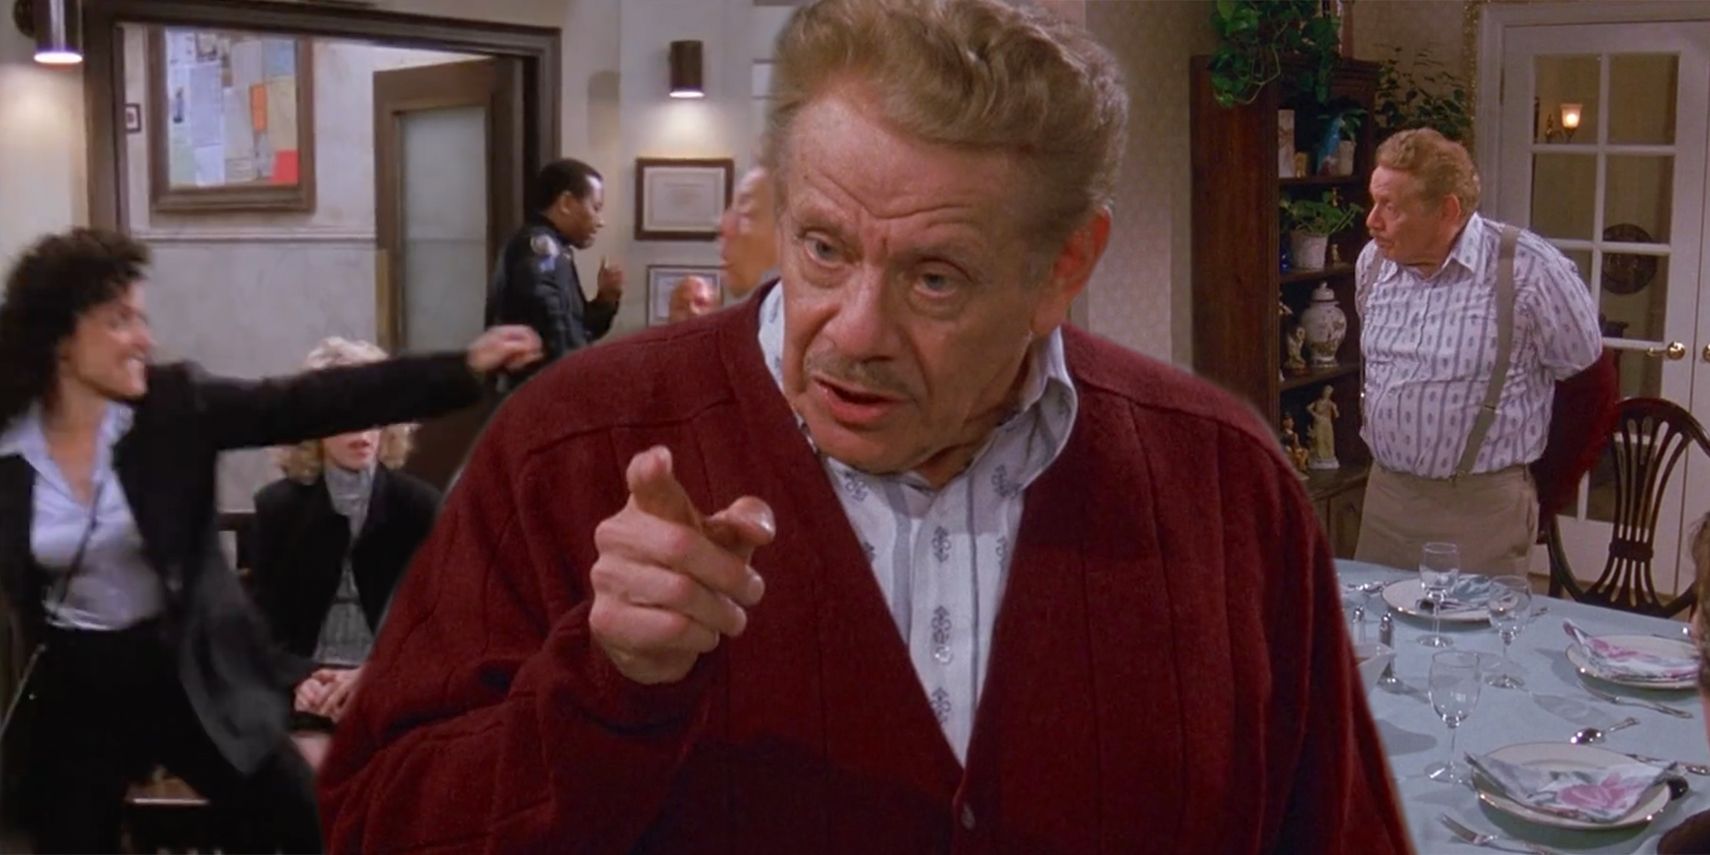 Frank Costanza and main characters in Seinfeld